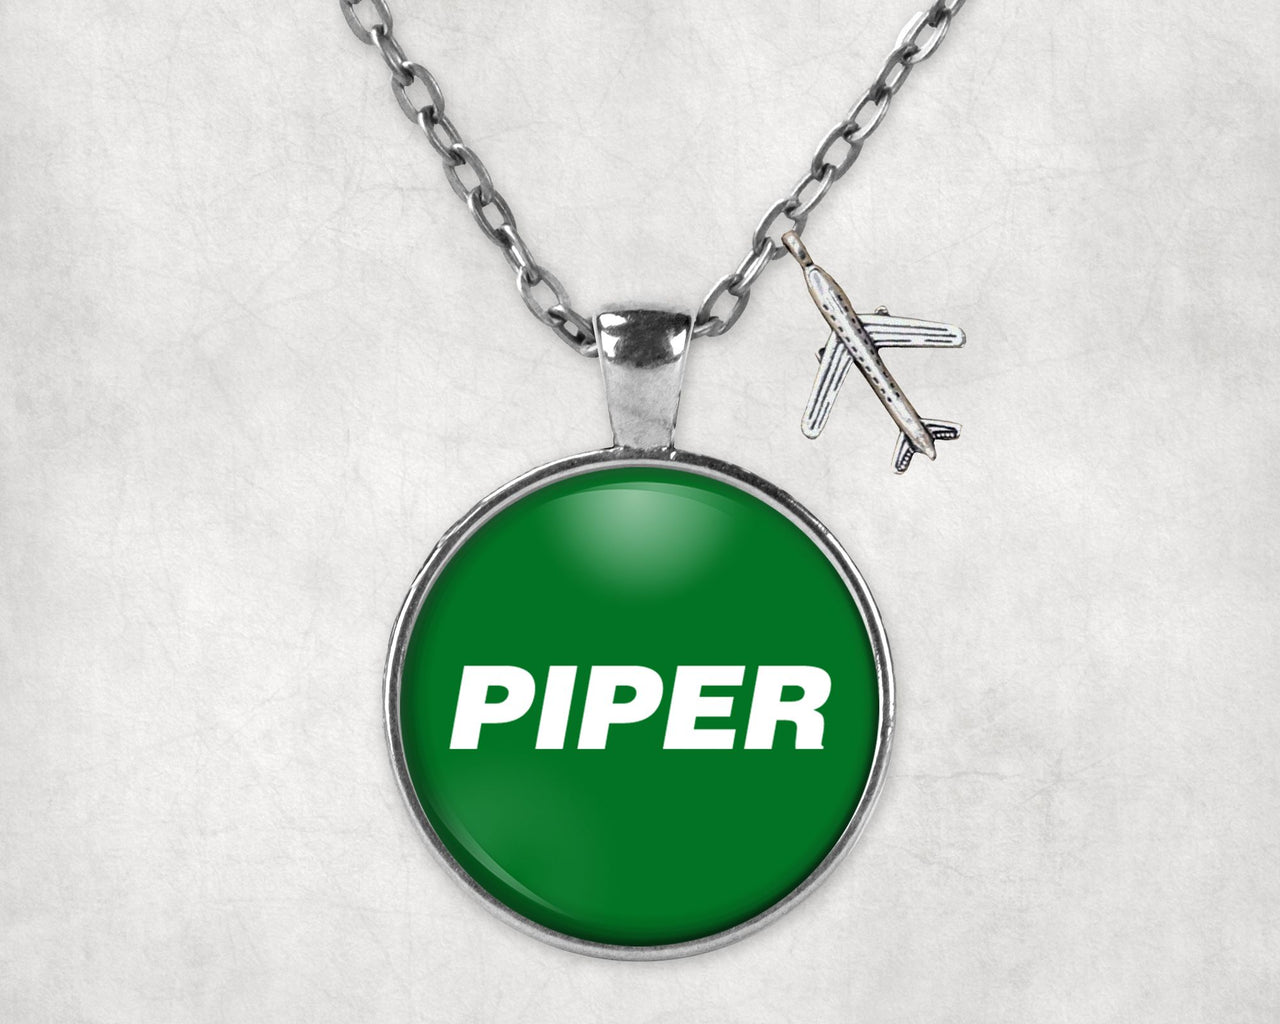 Piper & Text Designed Necklaces